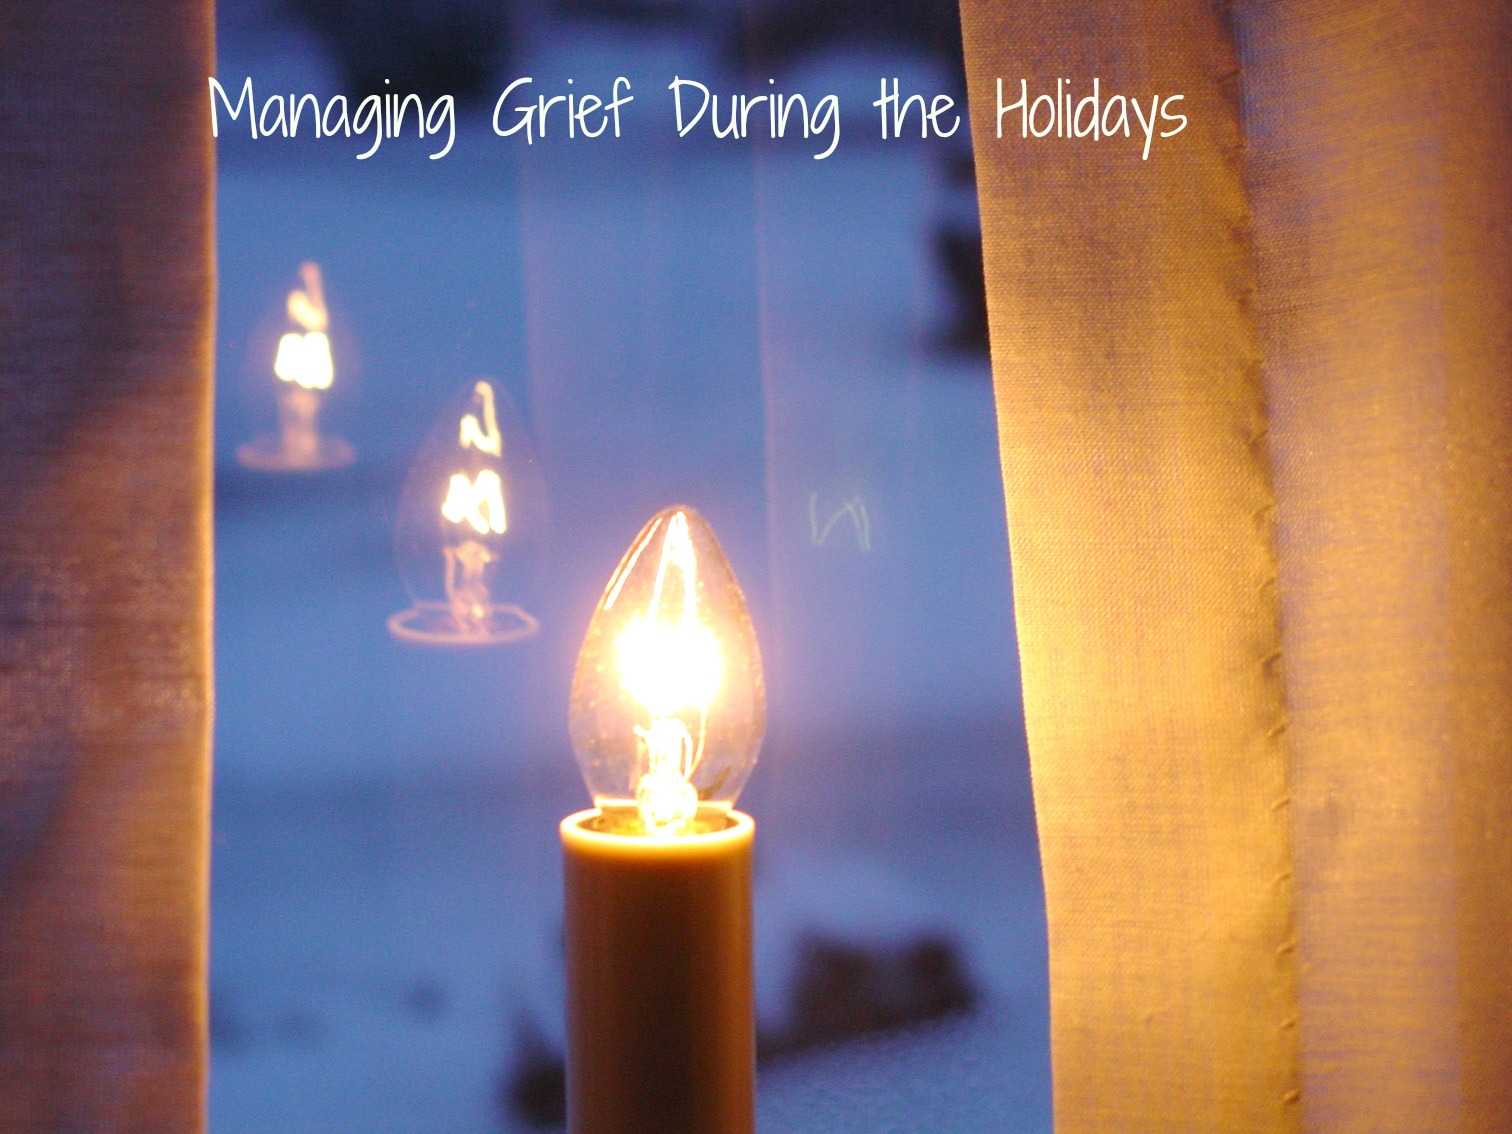 Managing Grief During the Holidays